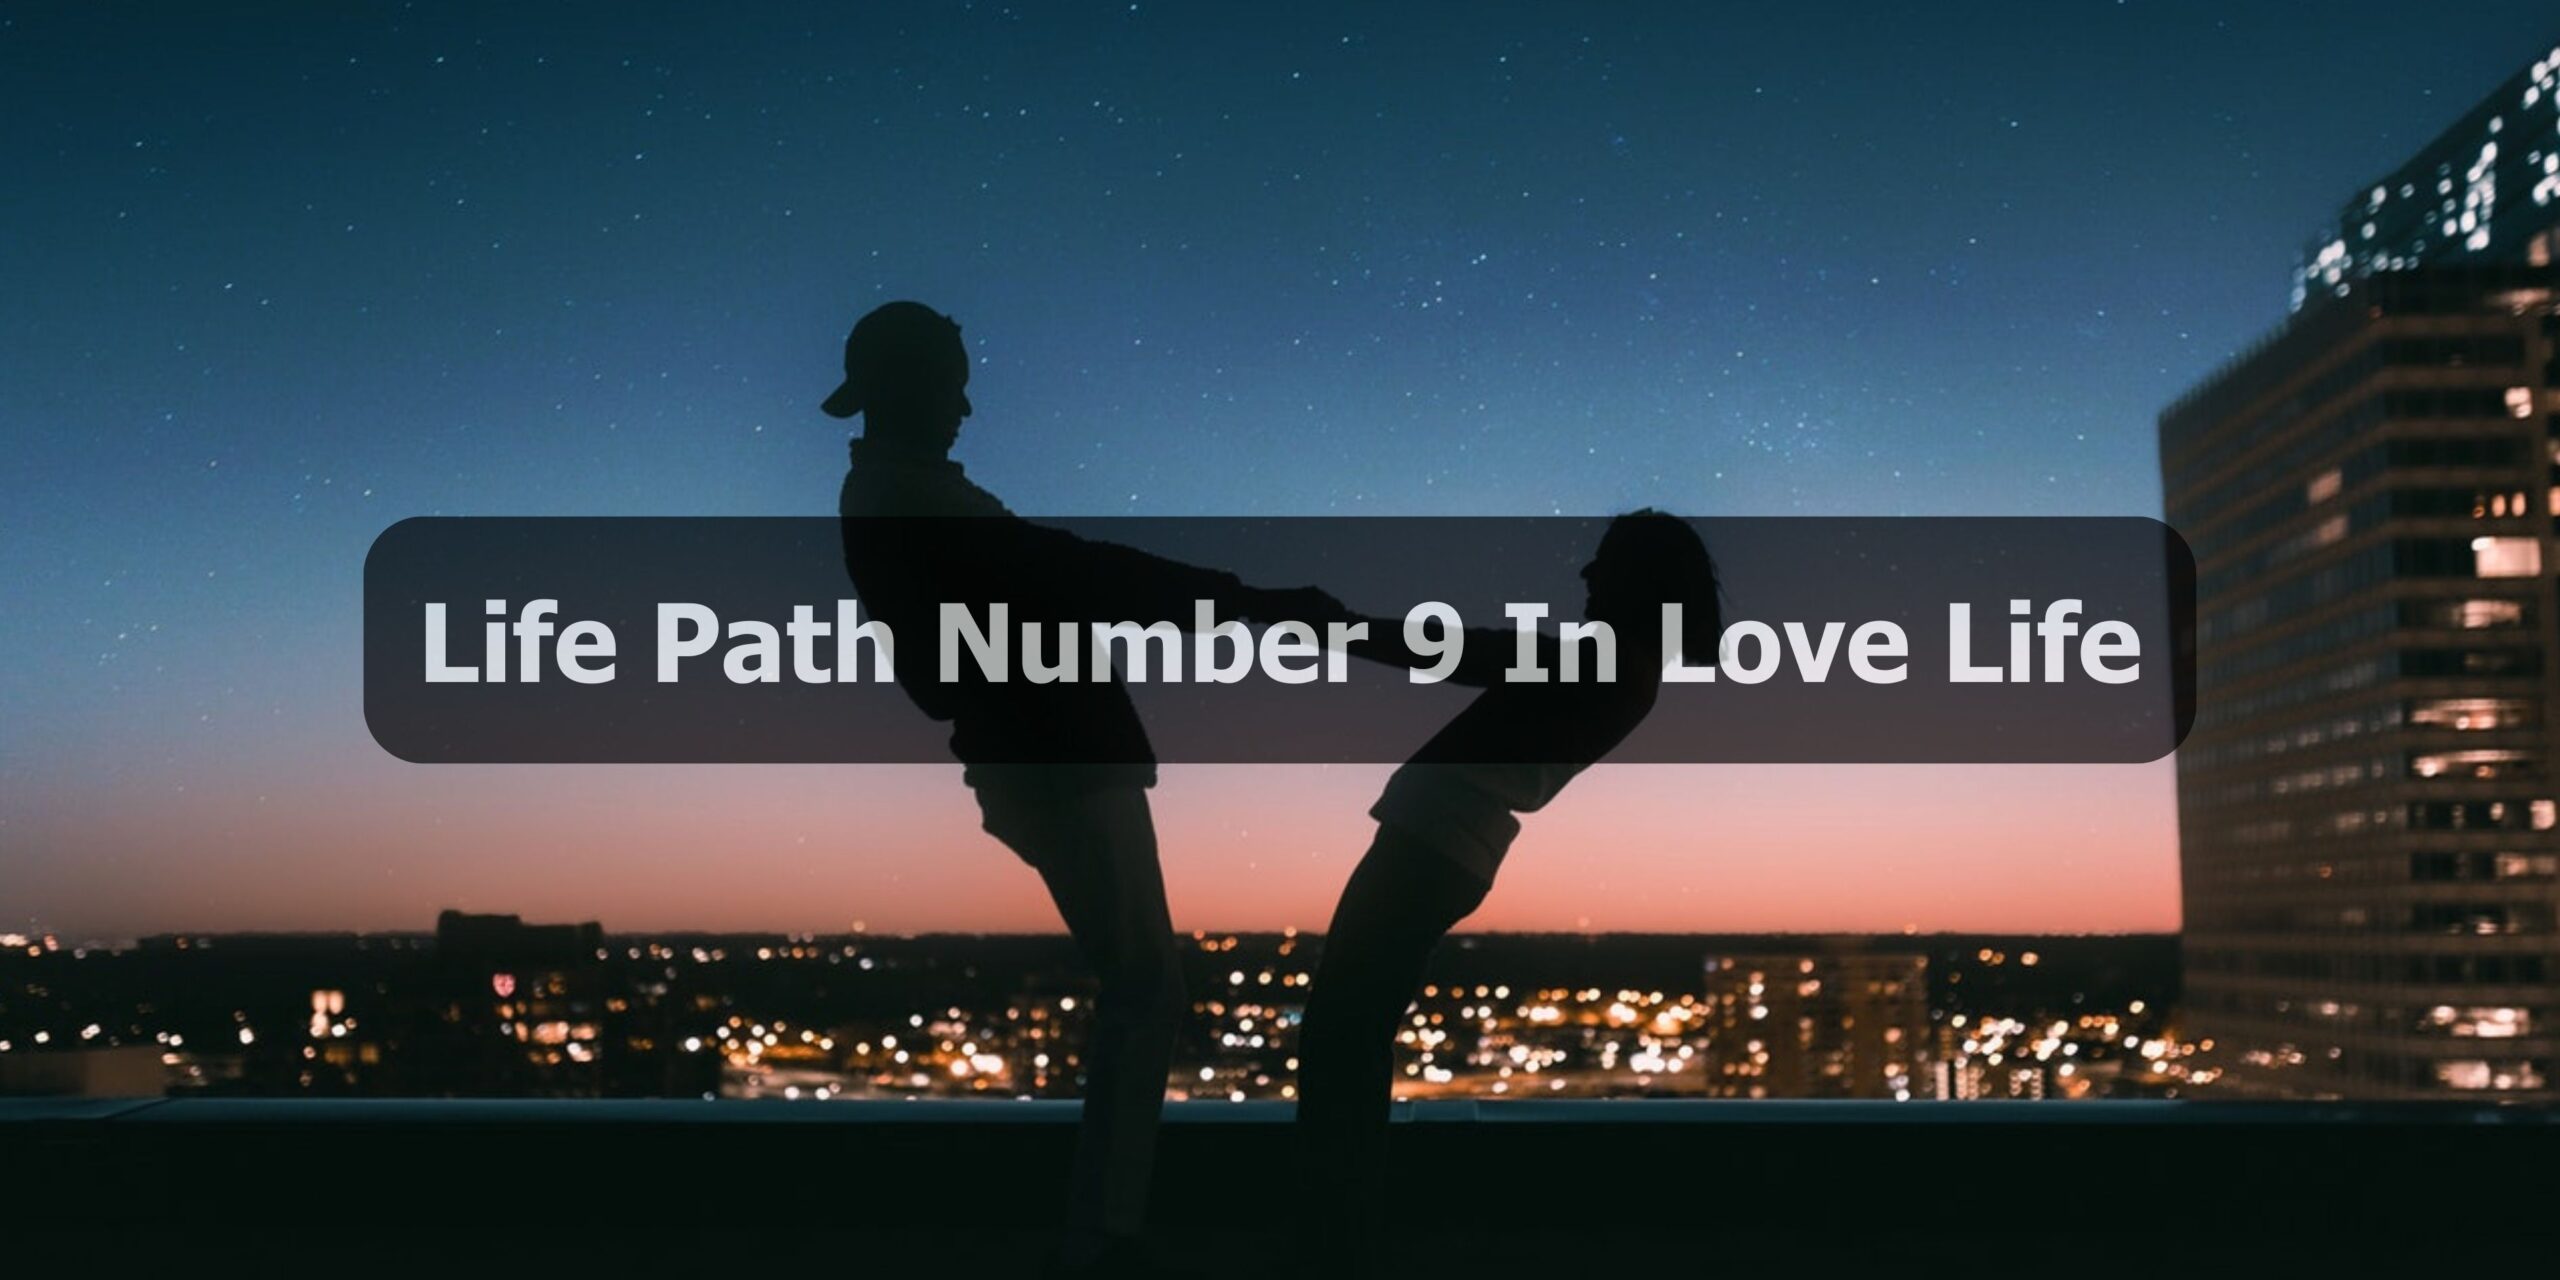 Life Path Number 9 In Love Life